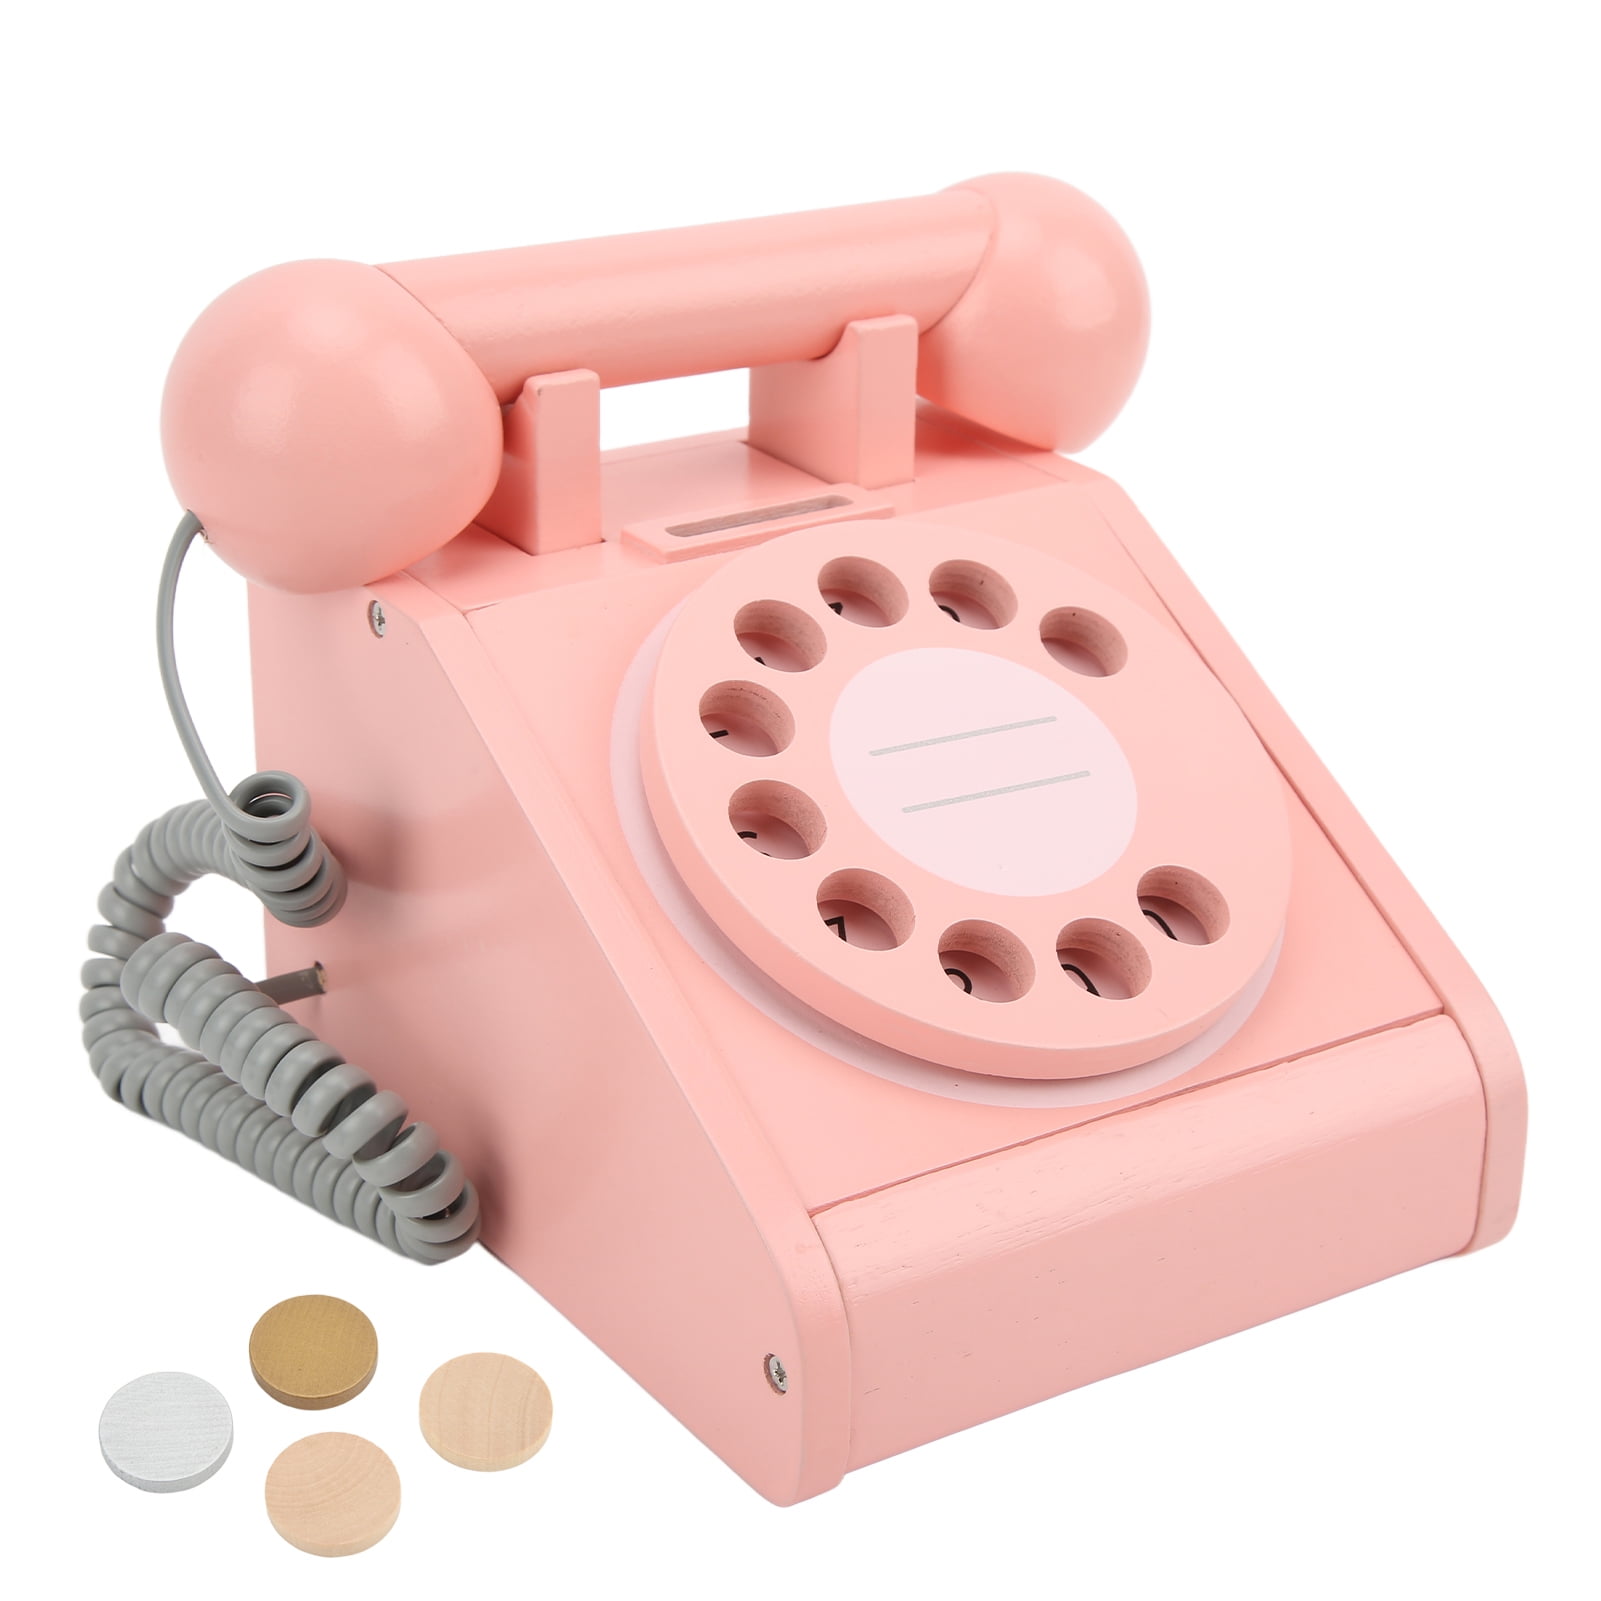 Spptty Wooden Simulation Telephone, Pink Old Fashioned Rotatable Dial  Telephone Multi Purpose For Kids For Home For Gifts